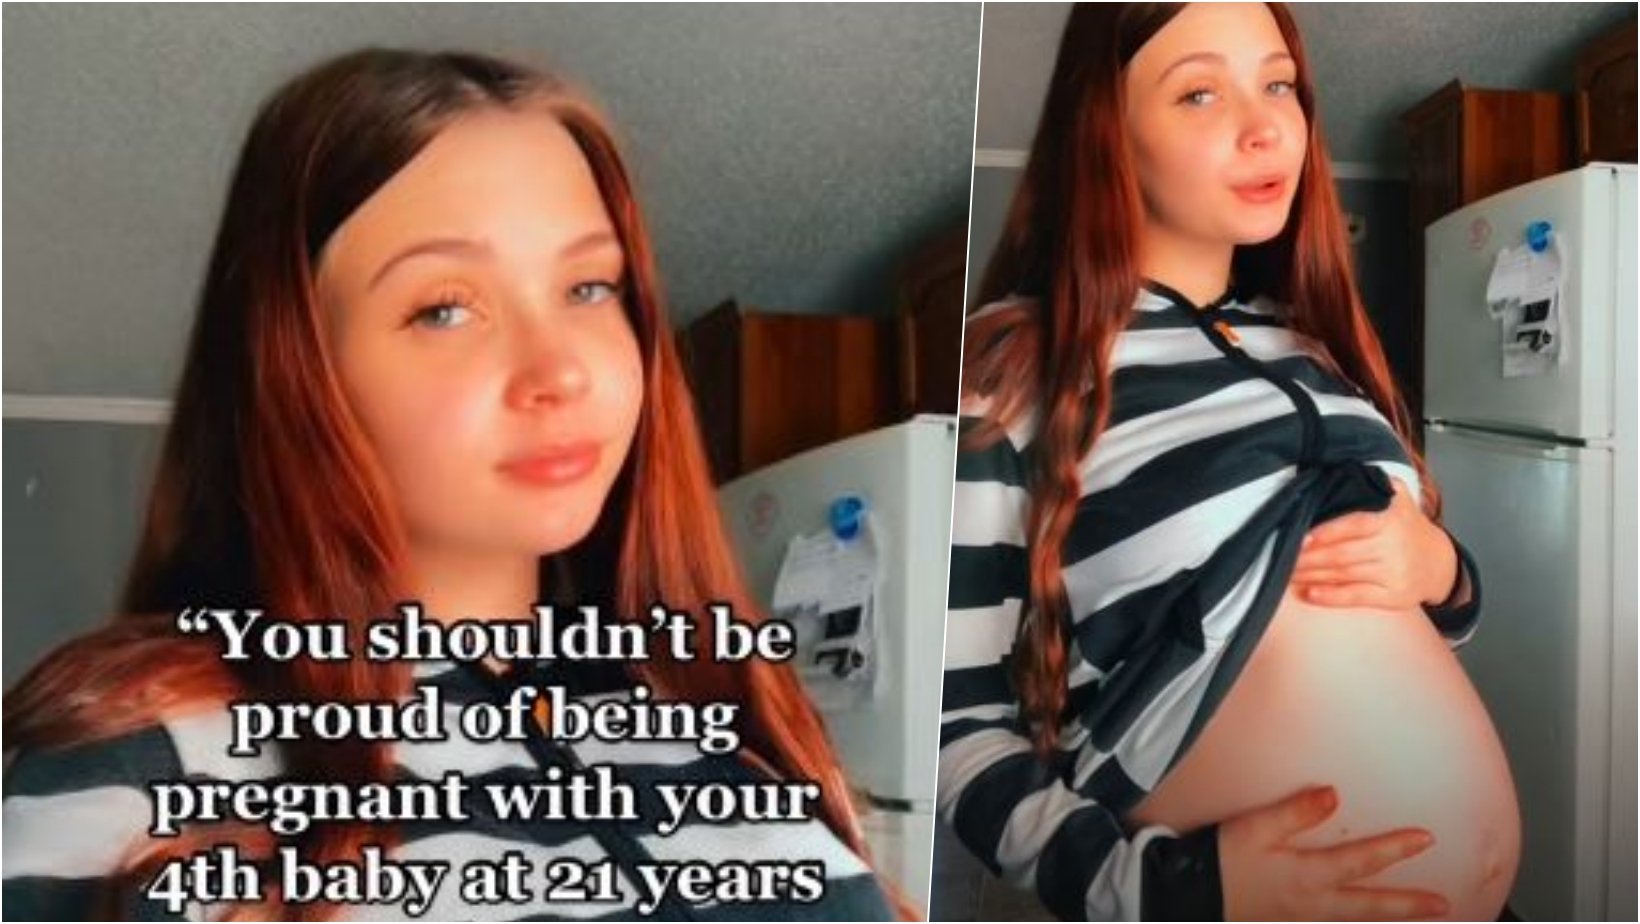 6 facebook cover 31.jpg?resize=412,232 - 21-Year-Old Mom Claps Back At Haters And Says She Is Ready To Welcome Her 4th Child, Adding That She’s Proud Of It